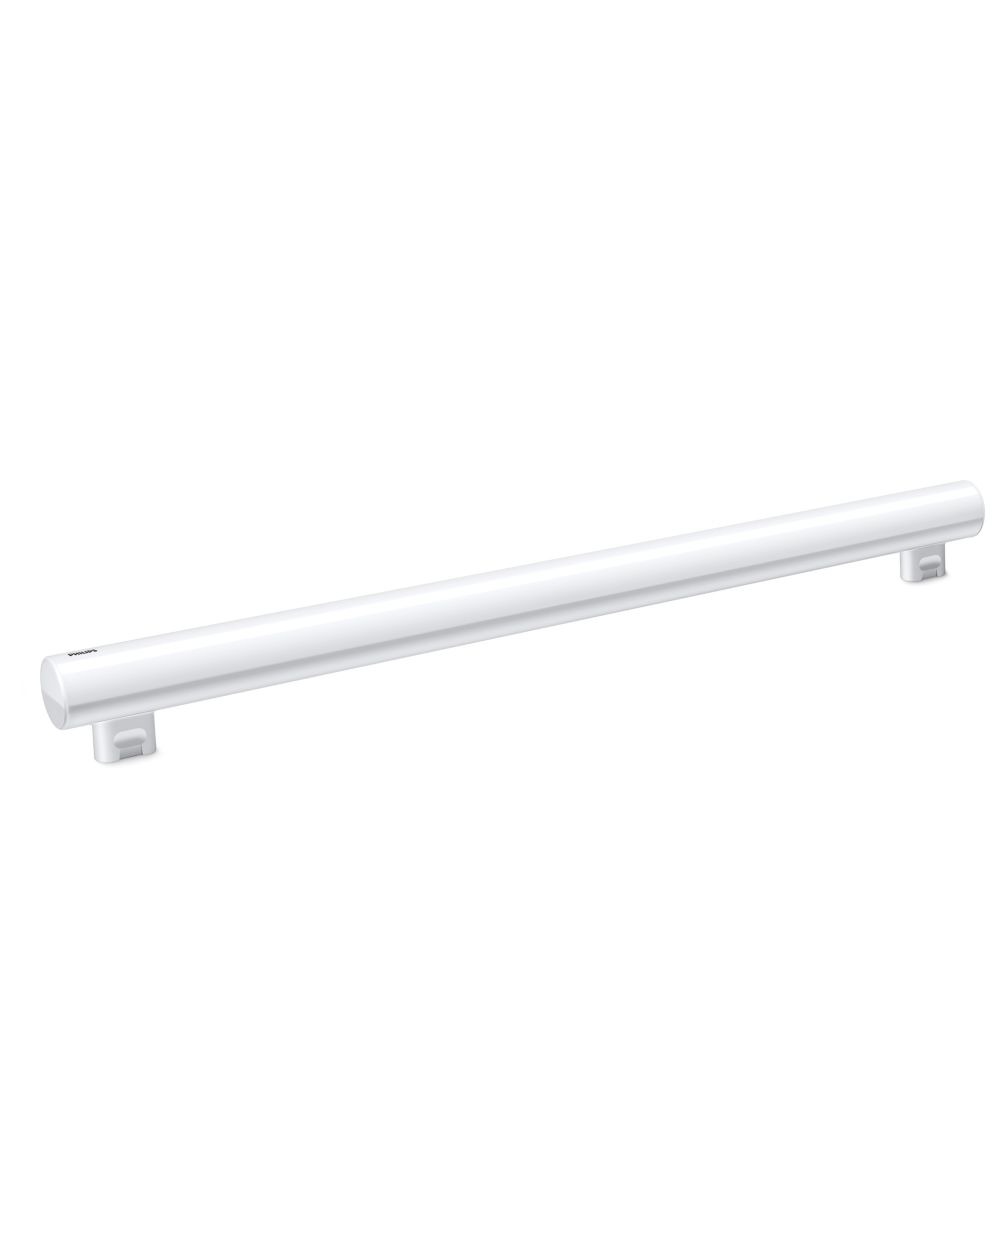 Philips LED buislamp S14S 3W 250Lm 30cm Wit